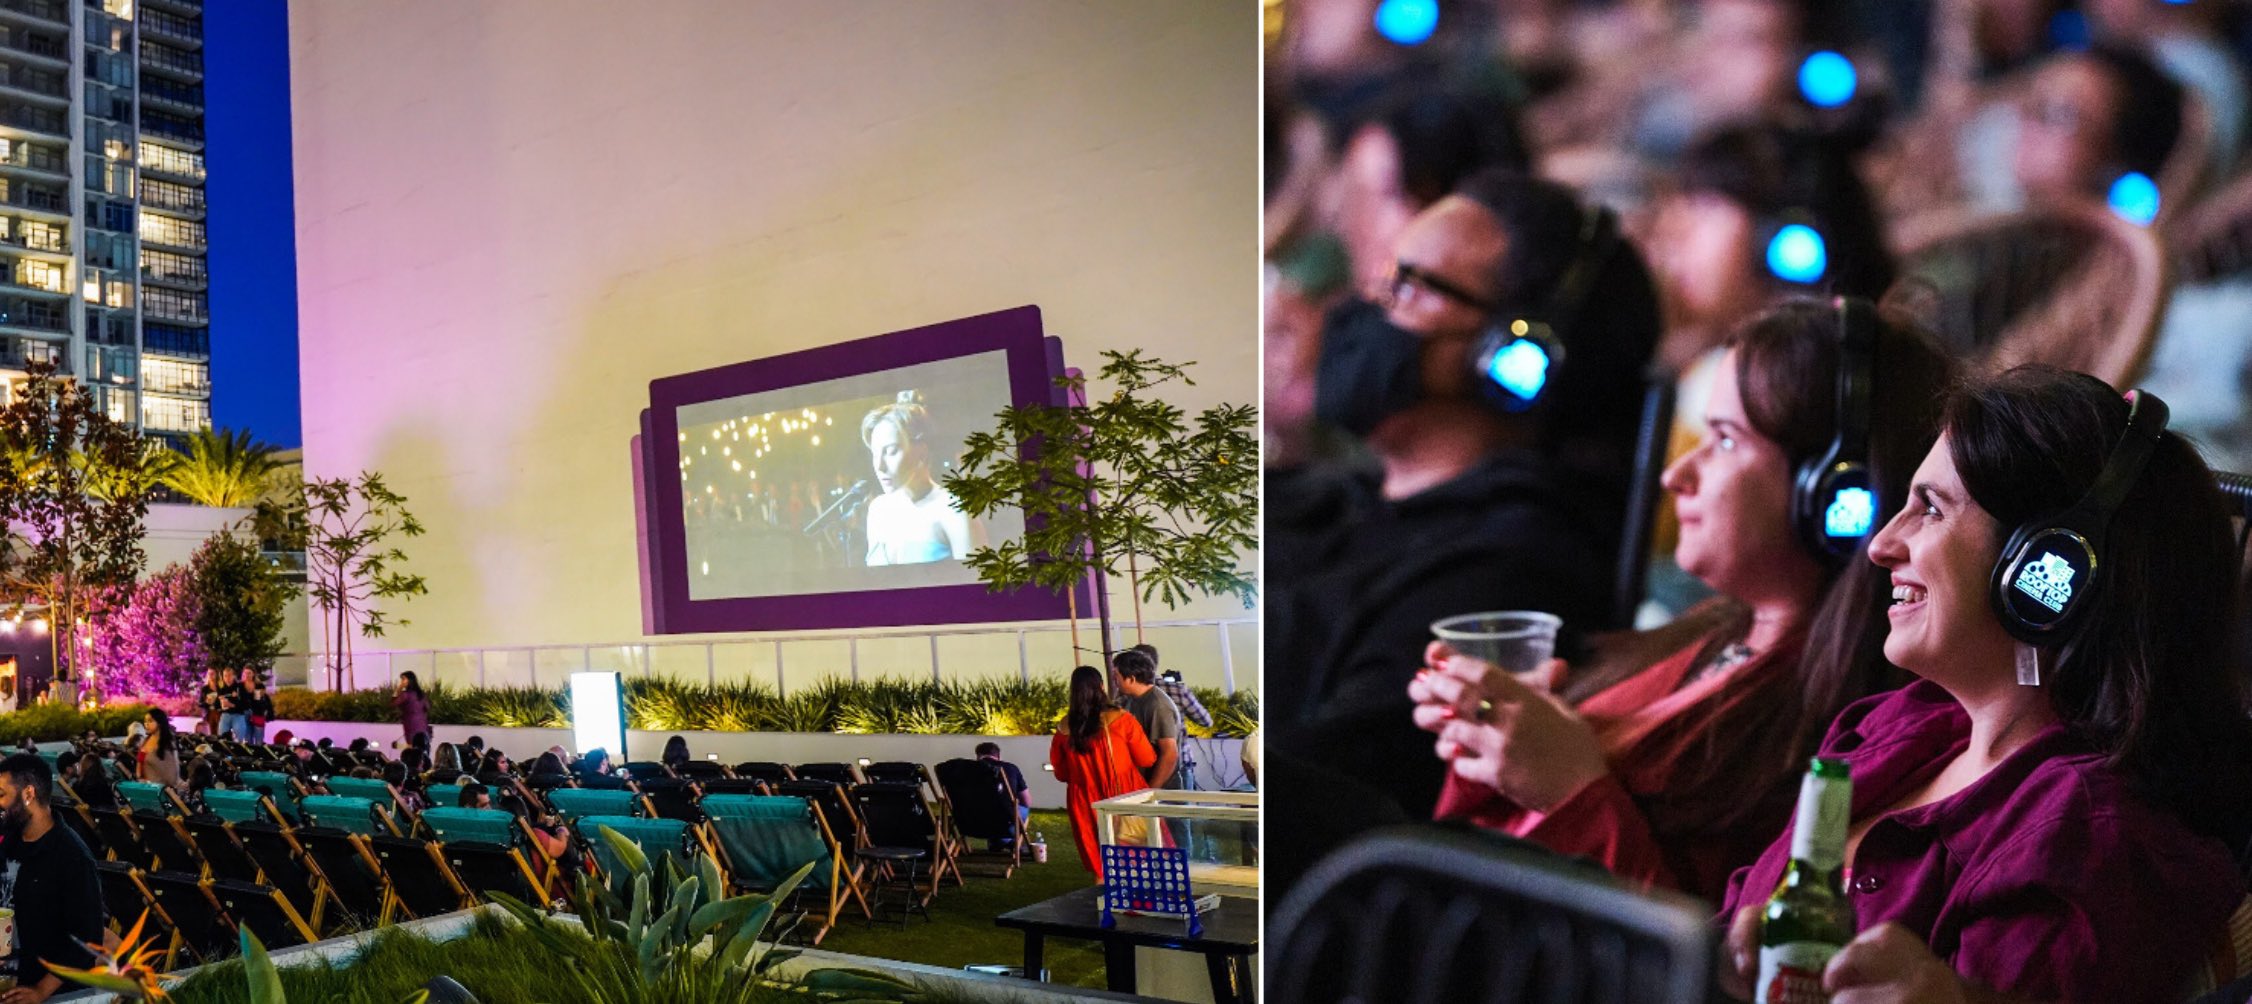 Rooftop Cinema Club Plays Outdoor Movies Under the Stars